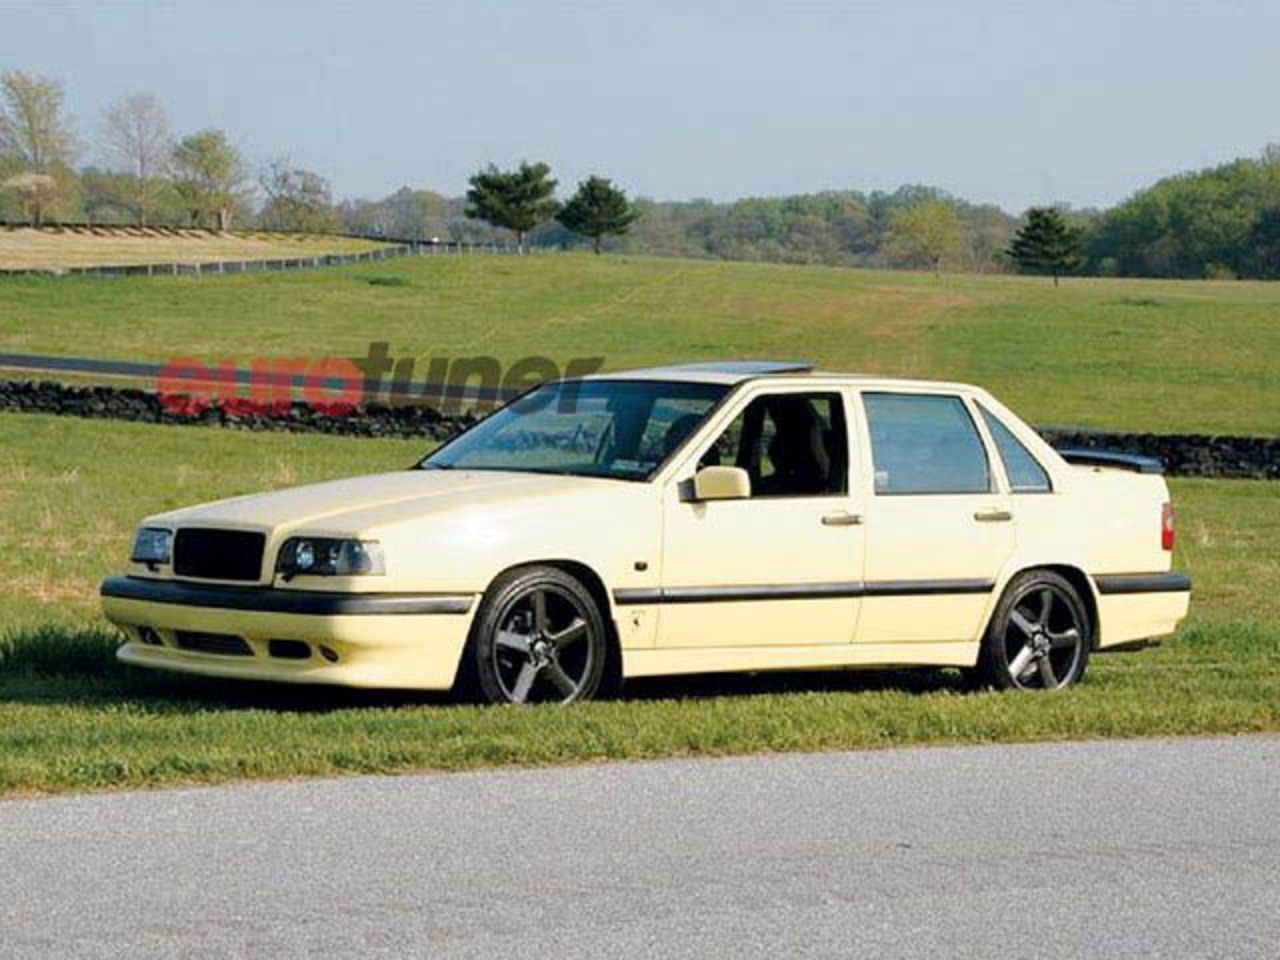 volvo 850r related images,101 to 150 - Zuoda Images